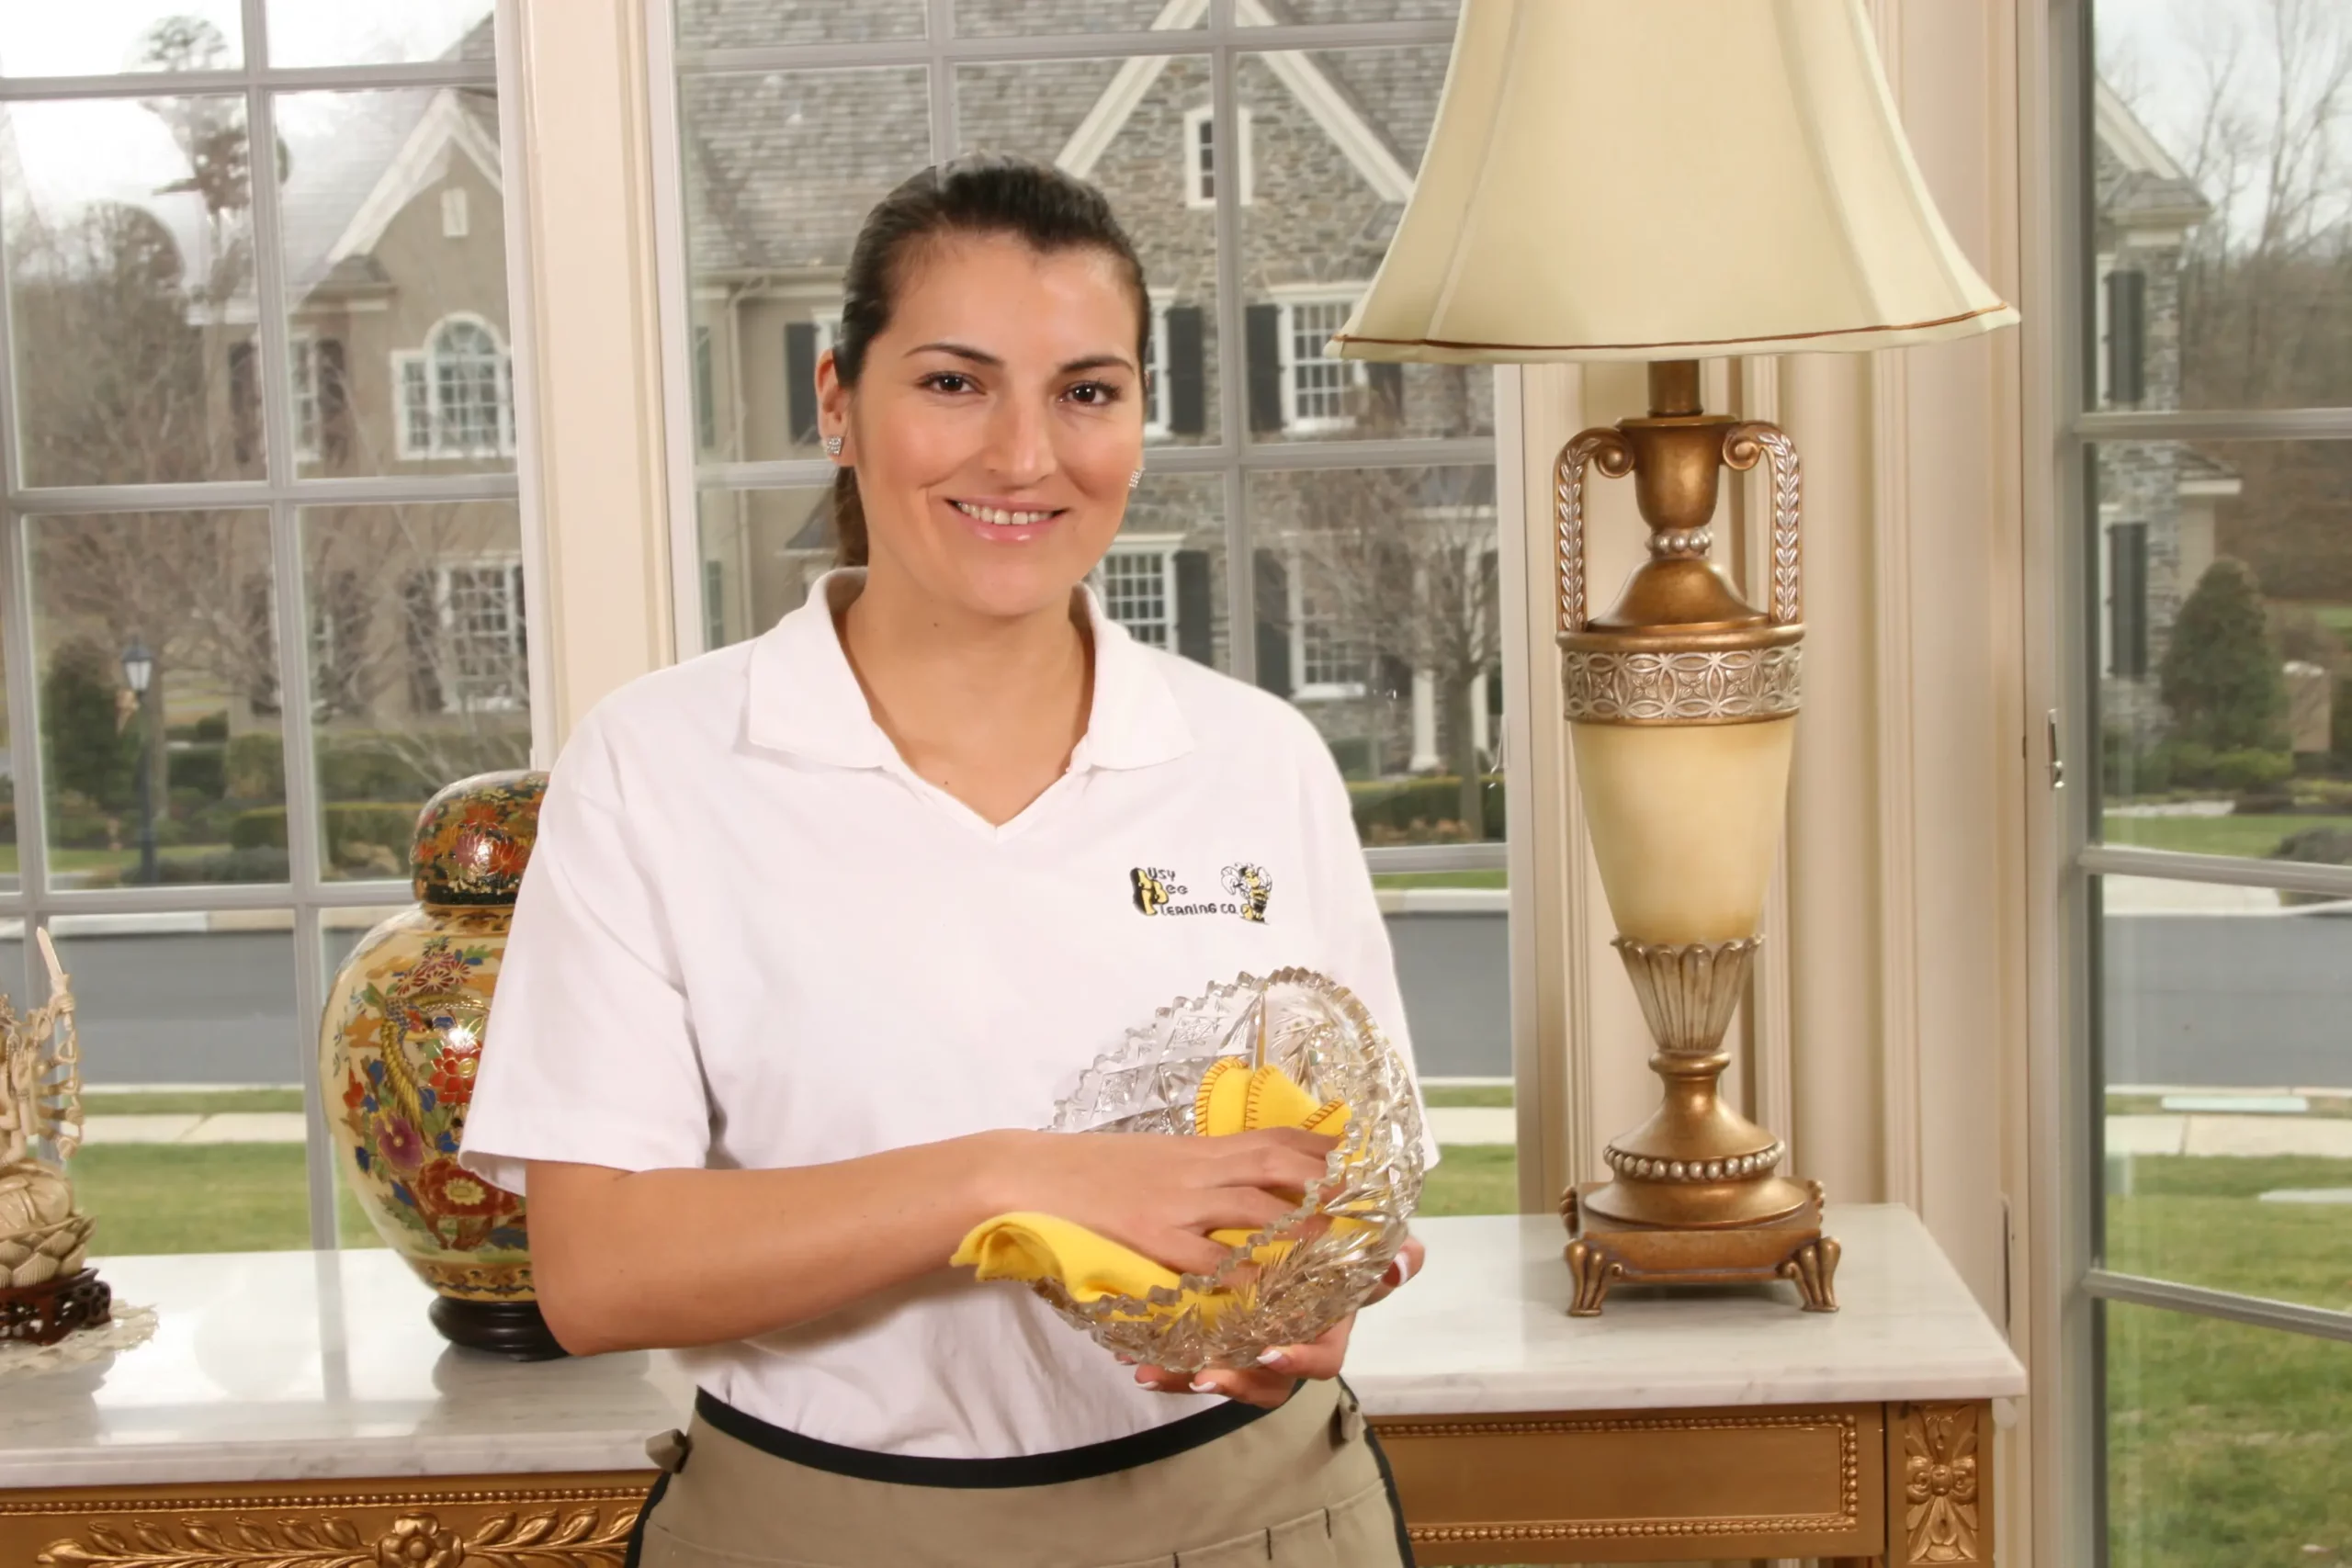 recently moved, professional staff, window sills, cleaning, picture frames, well being, properly cleaned, chester county cleaning services in west chester and beyond 